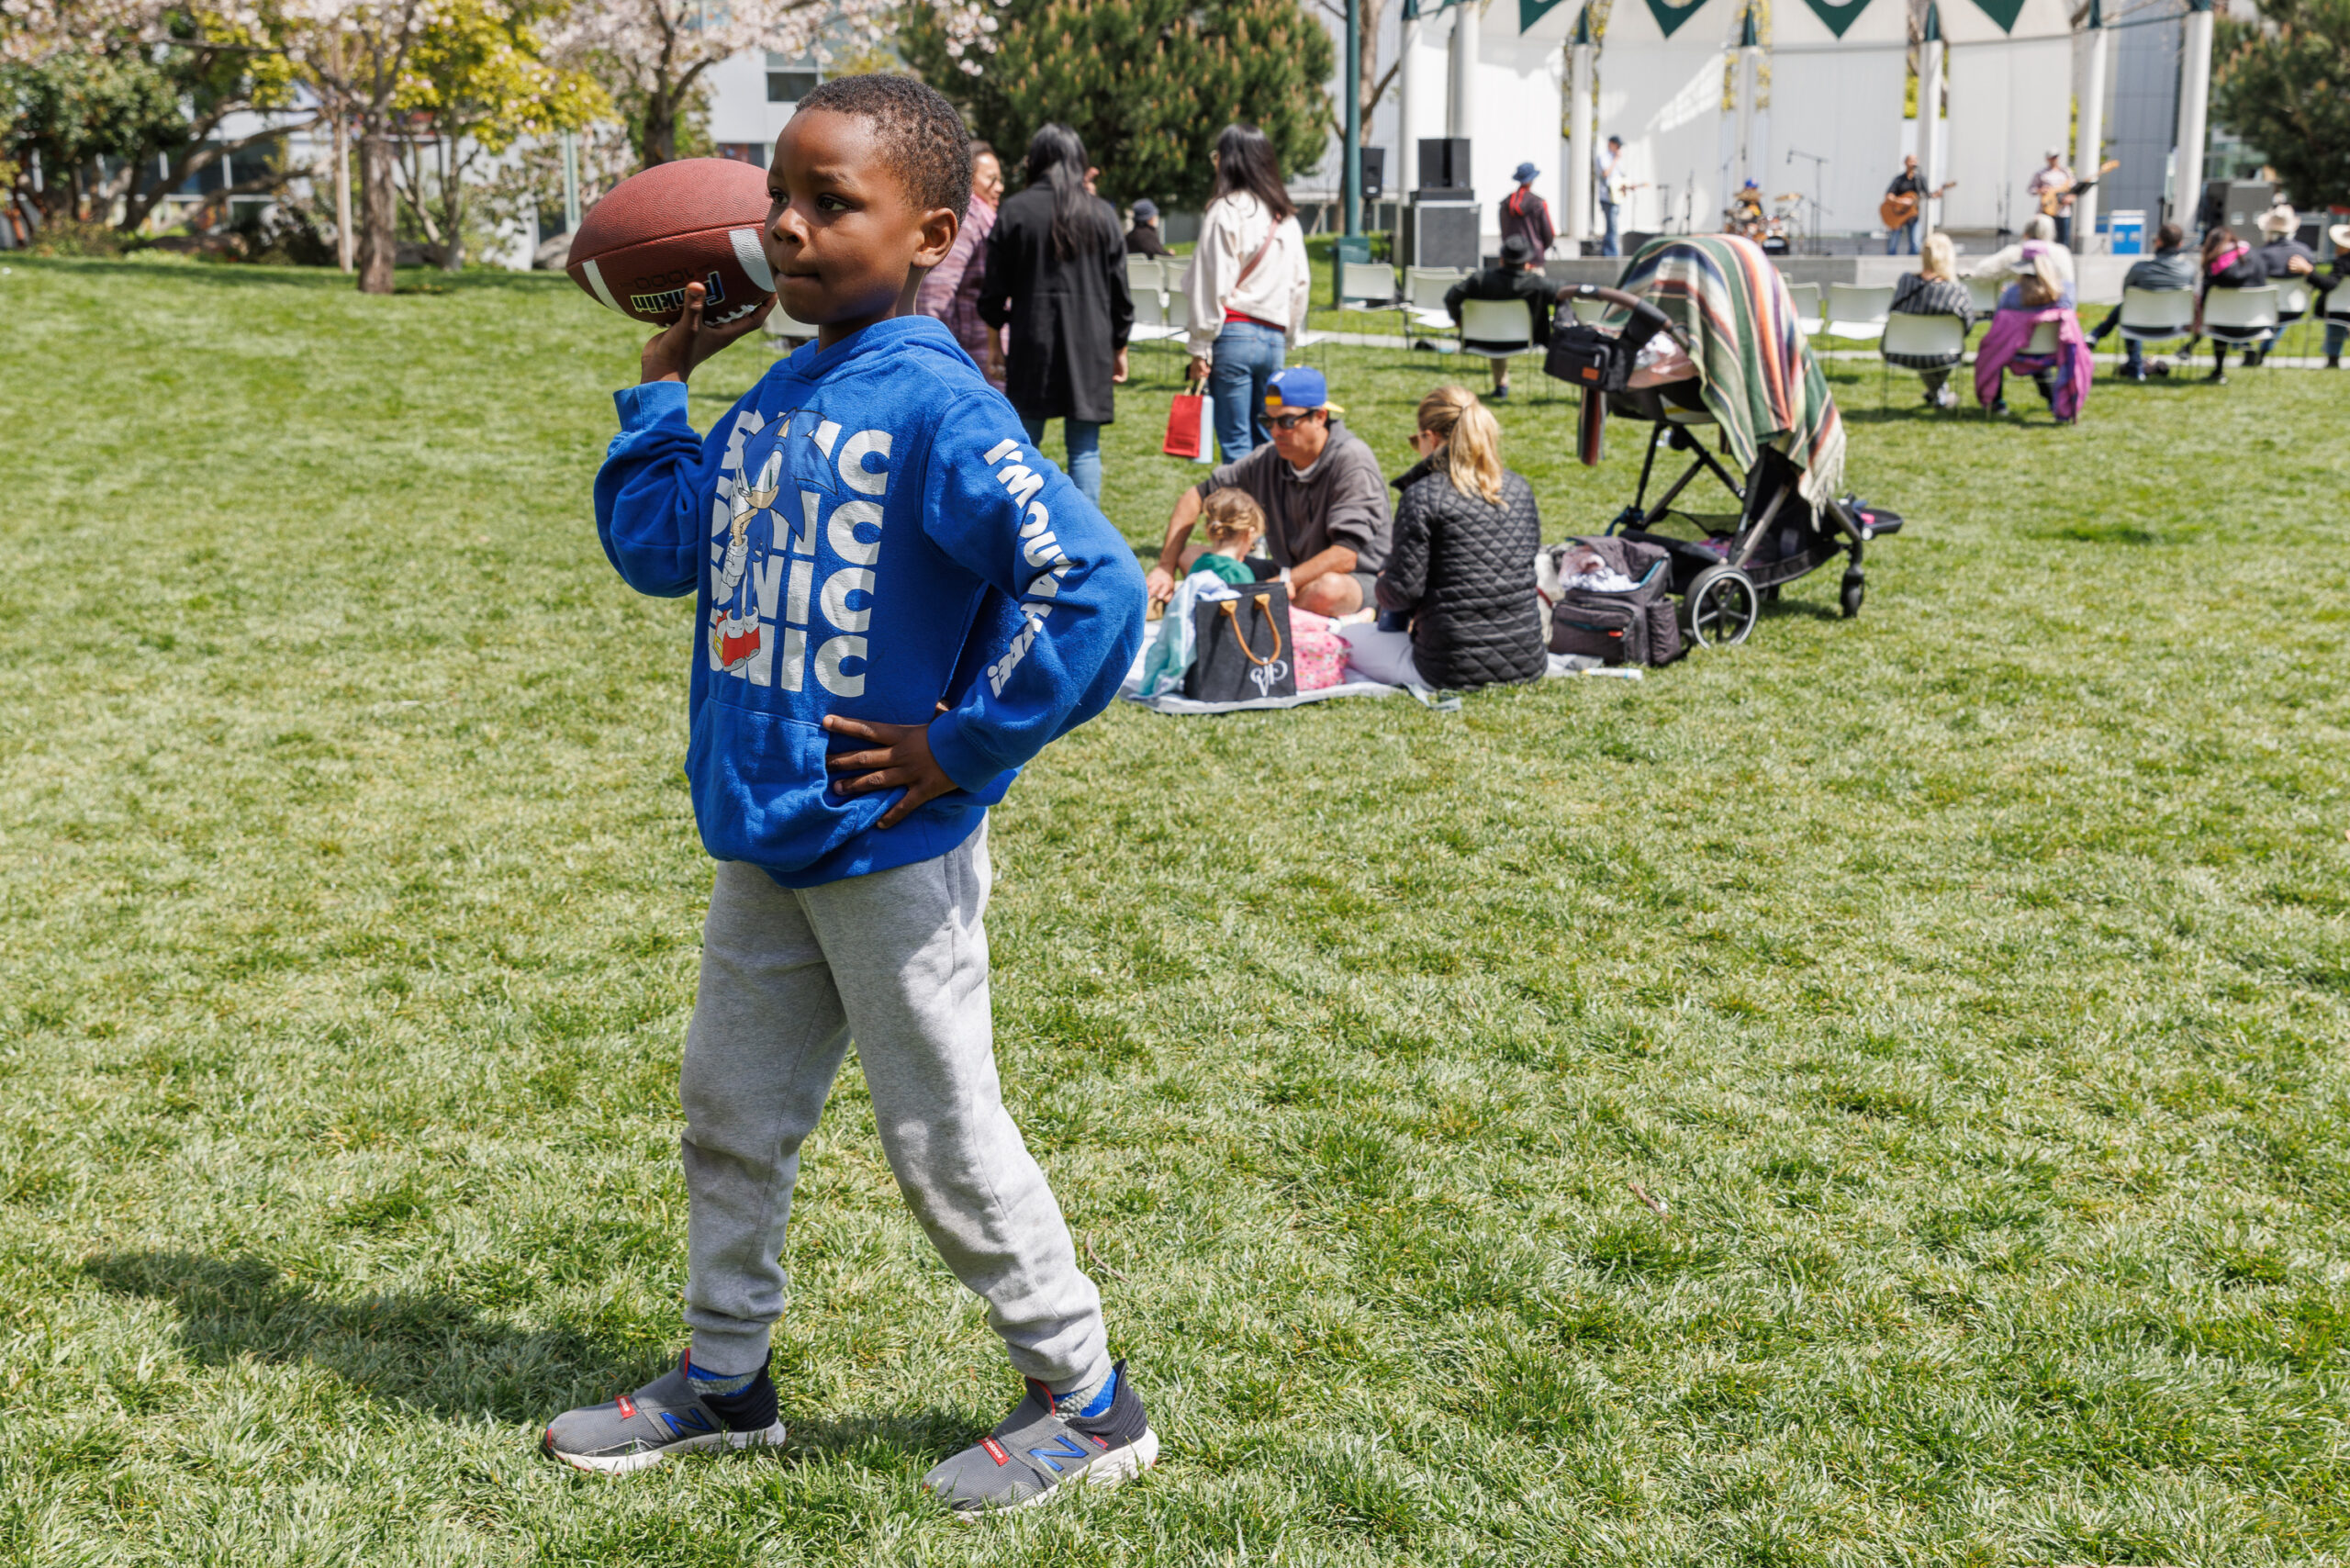 A young African American youth wearing an Sonic the Hedgehog hooded sweatshirt, prepares to throw a football in a large grassy area at Yerba Buena gardens as families enjoy warm weather in the background while a band plays on an elevated stage.